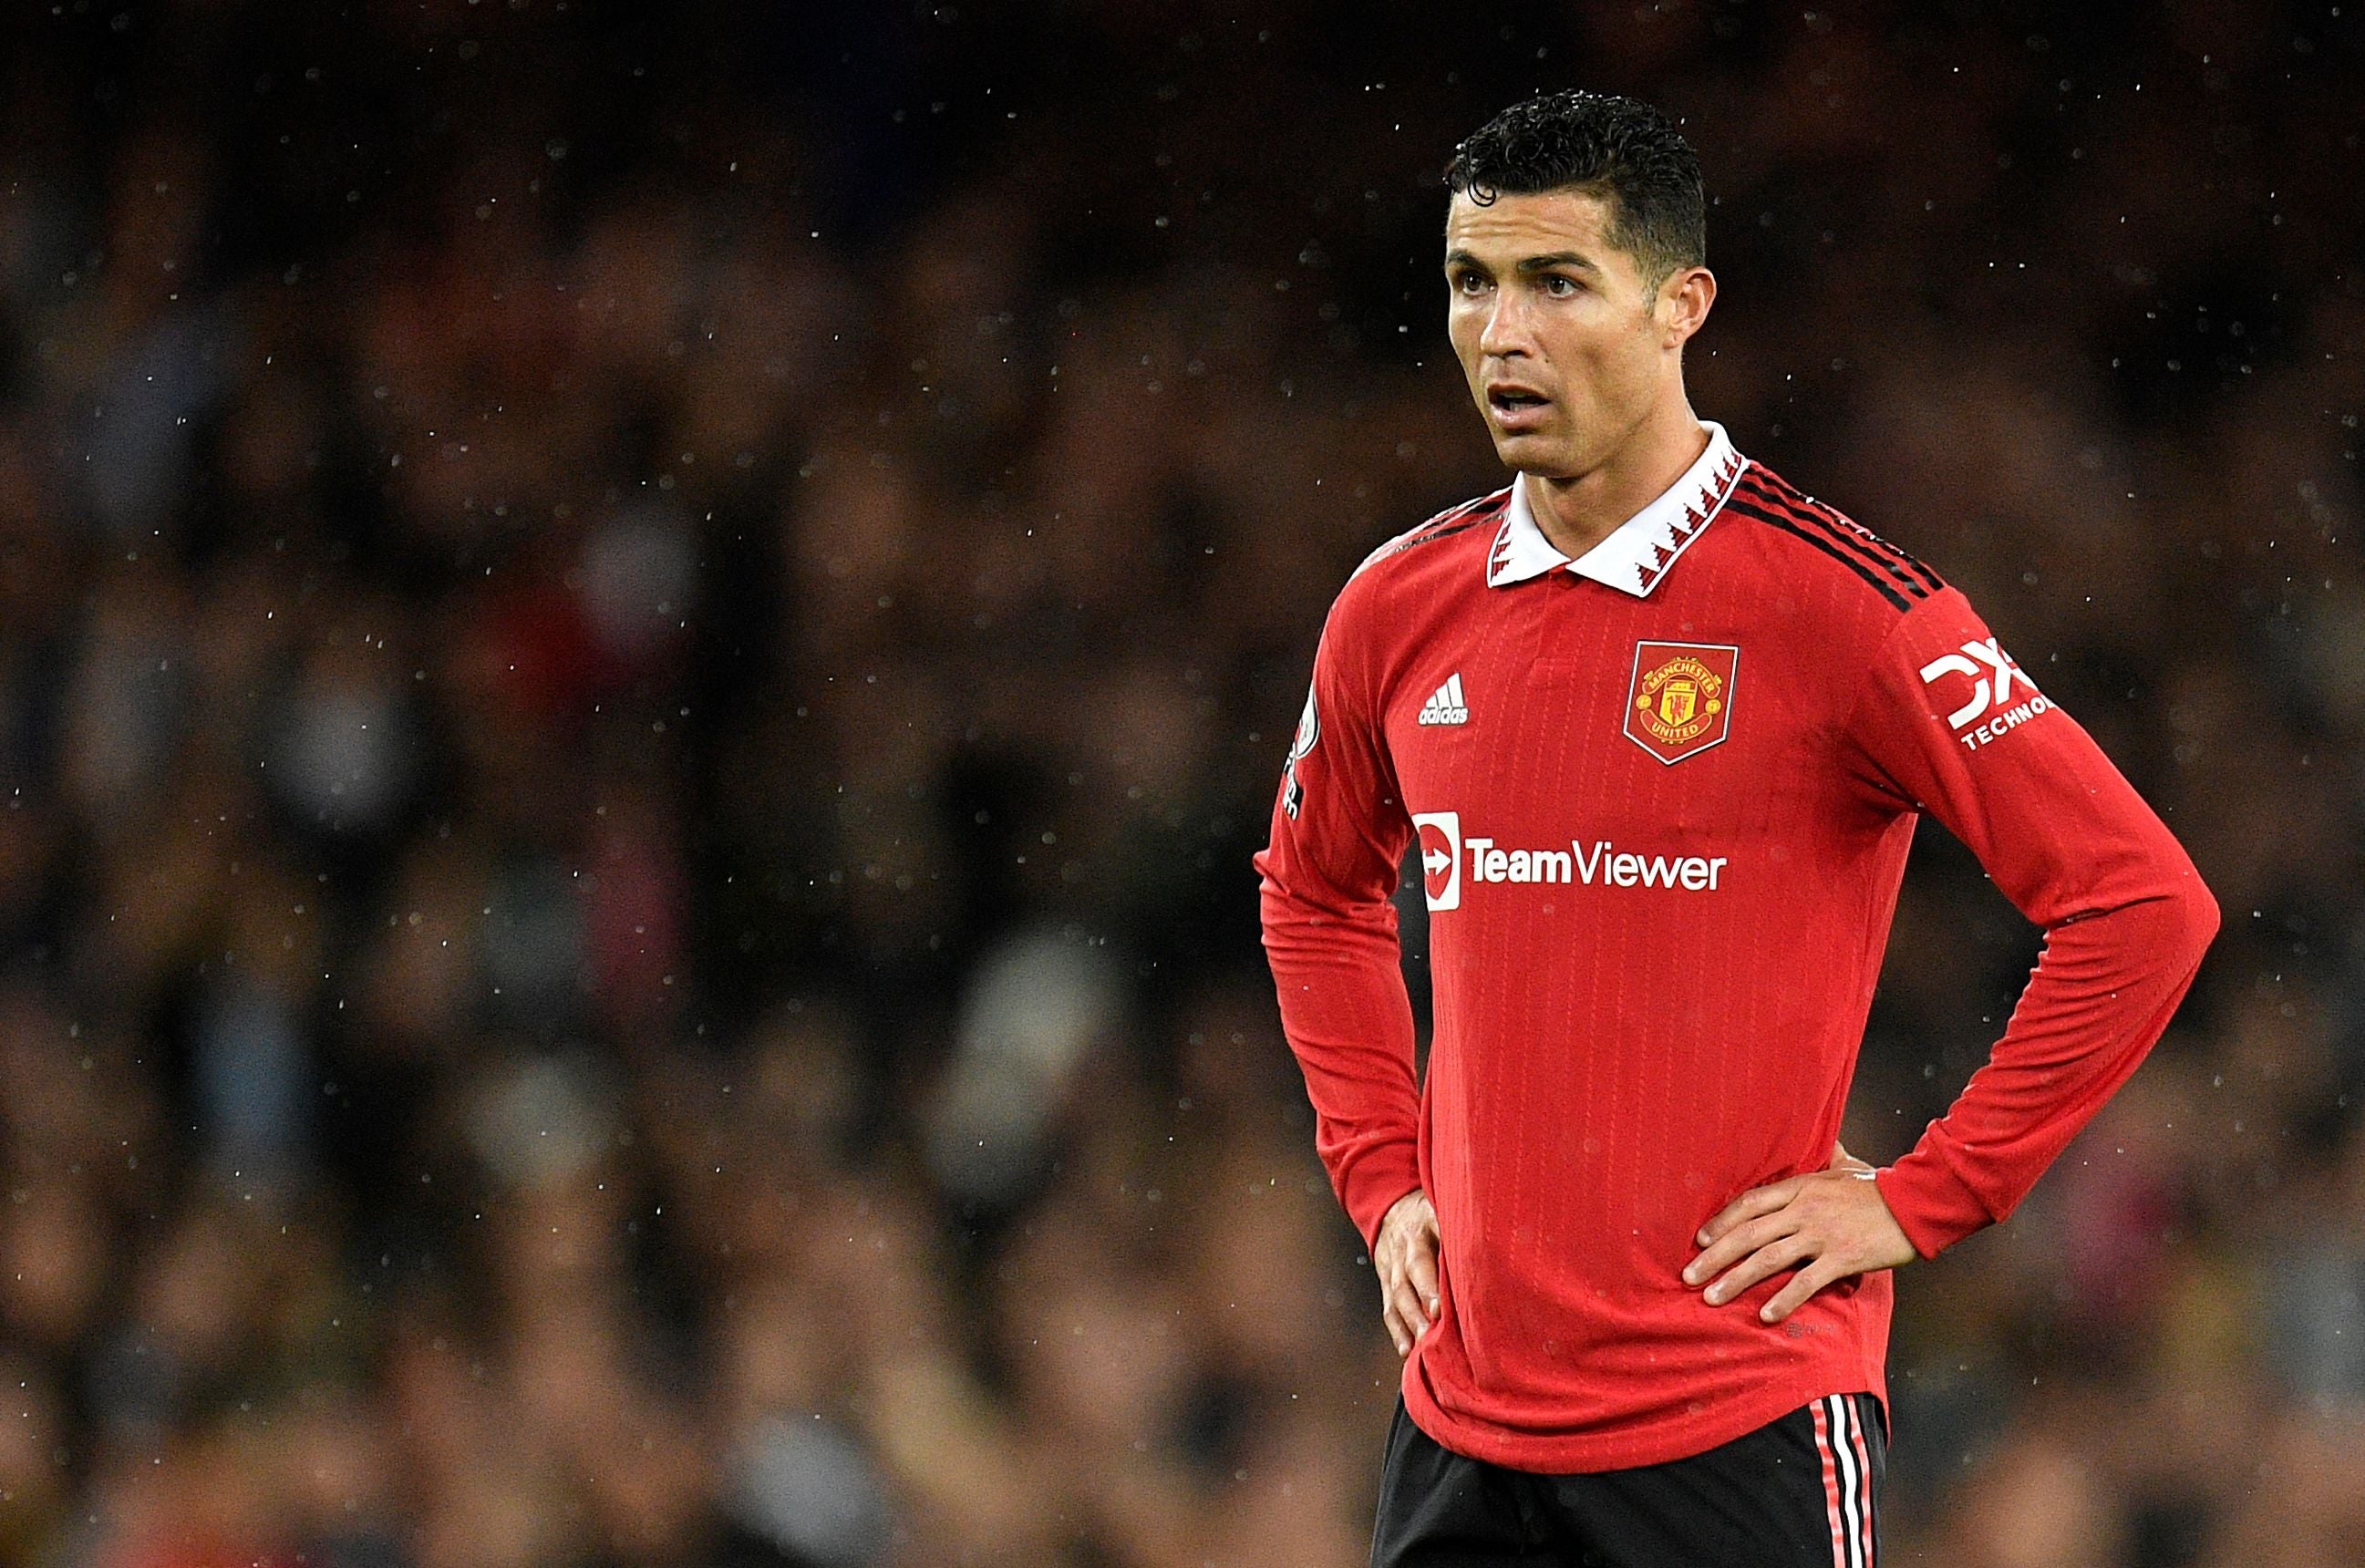 He may now be United’s third-choice striker, but Ronaldo is still capable of brilliance